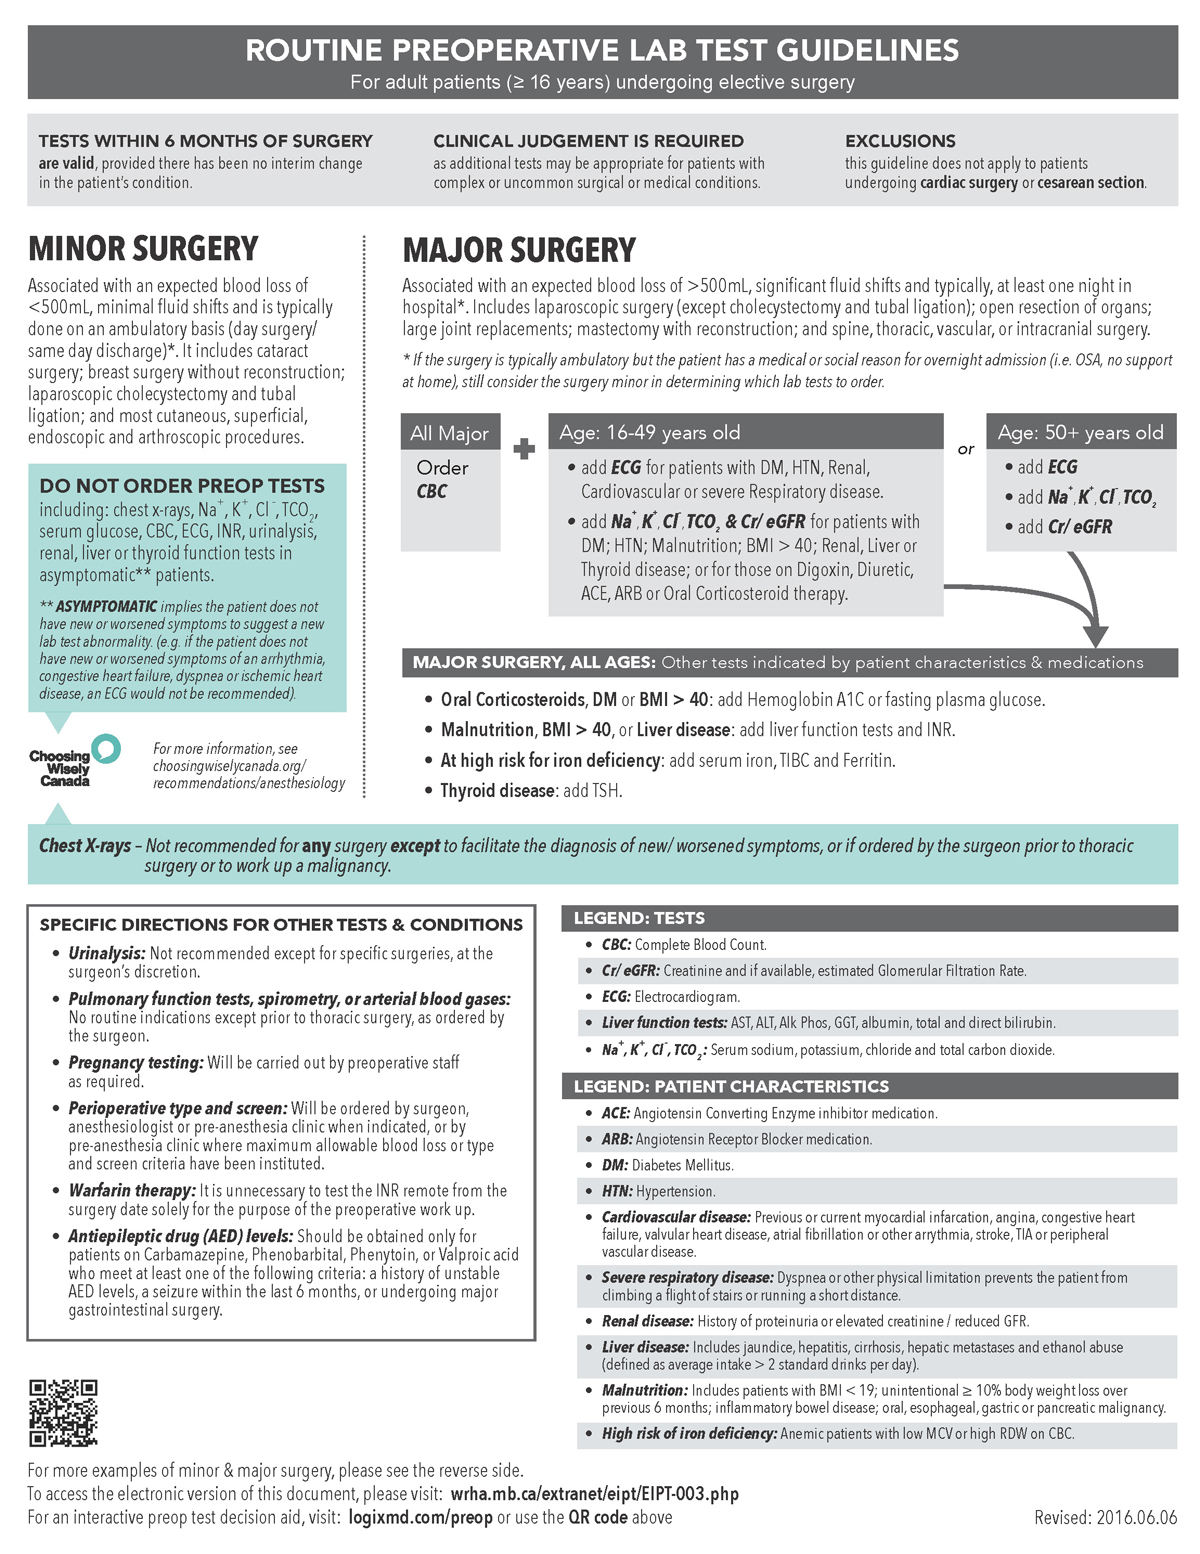 Choosing Wisely Canada Routine Preoperative Lab Test Guidelines